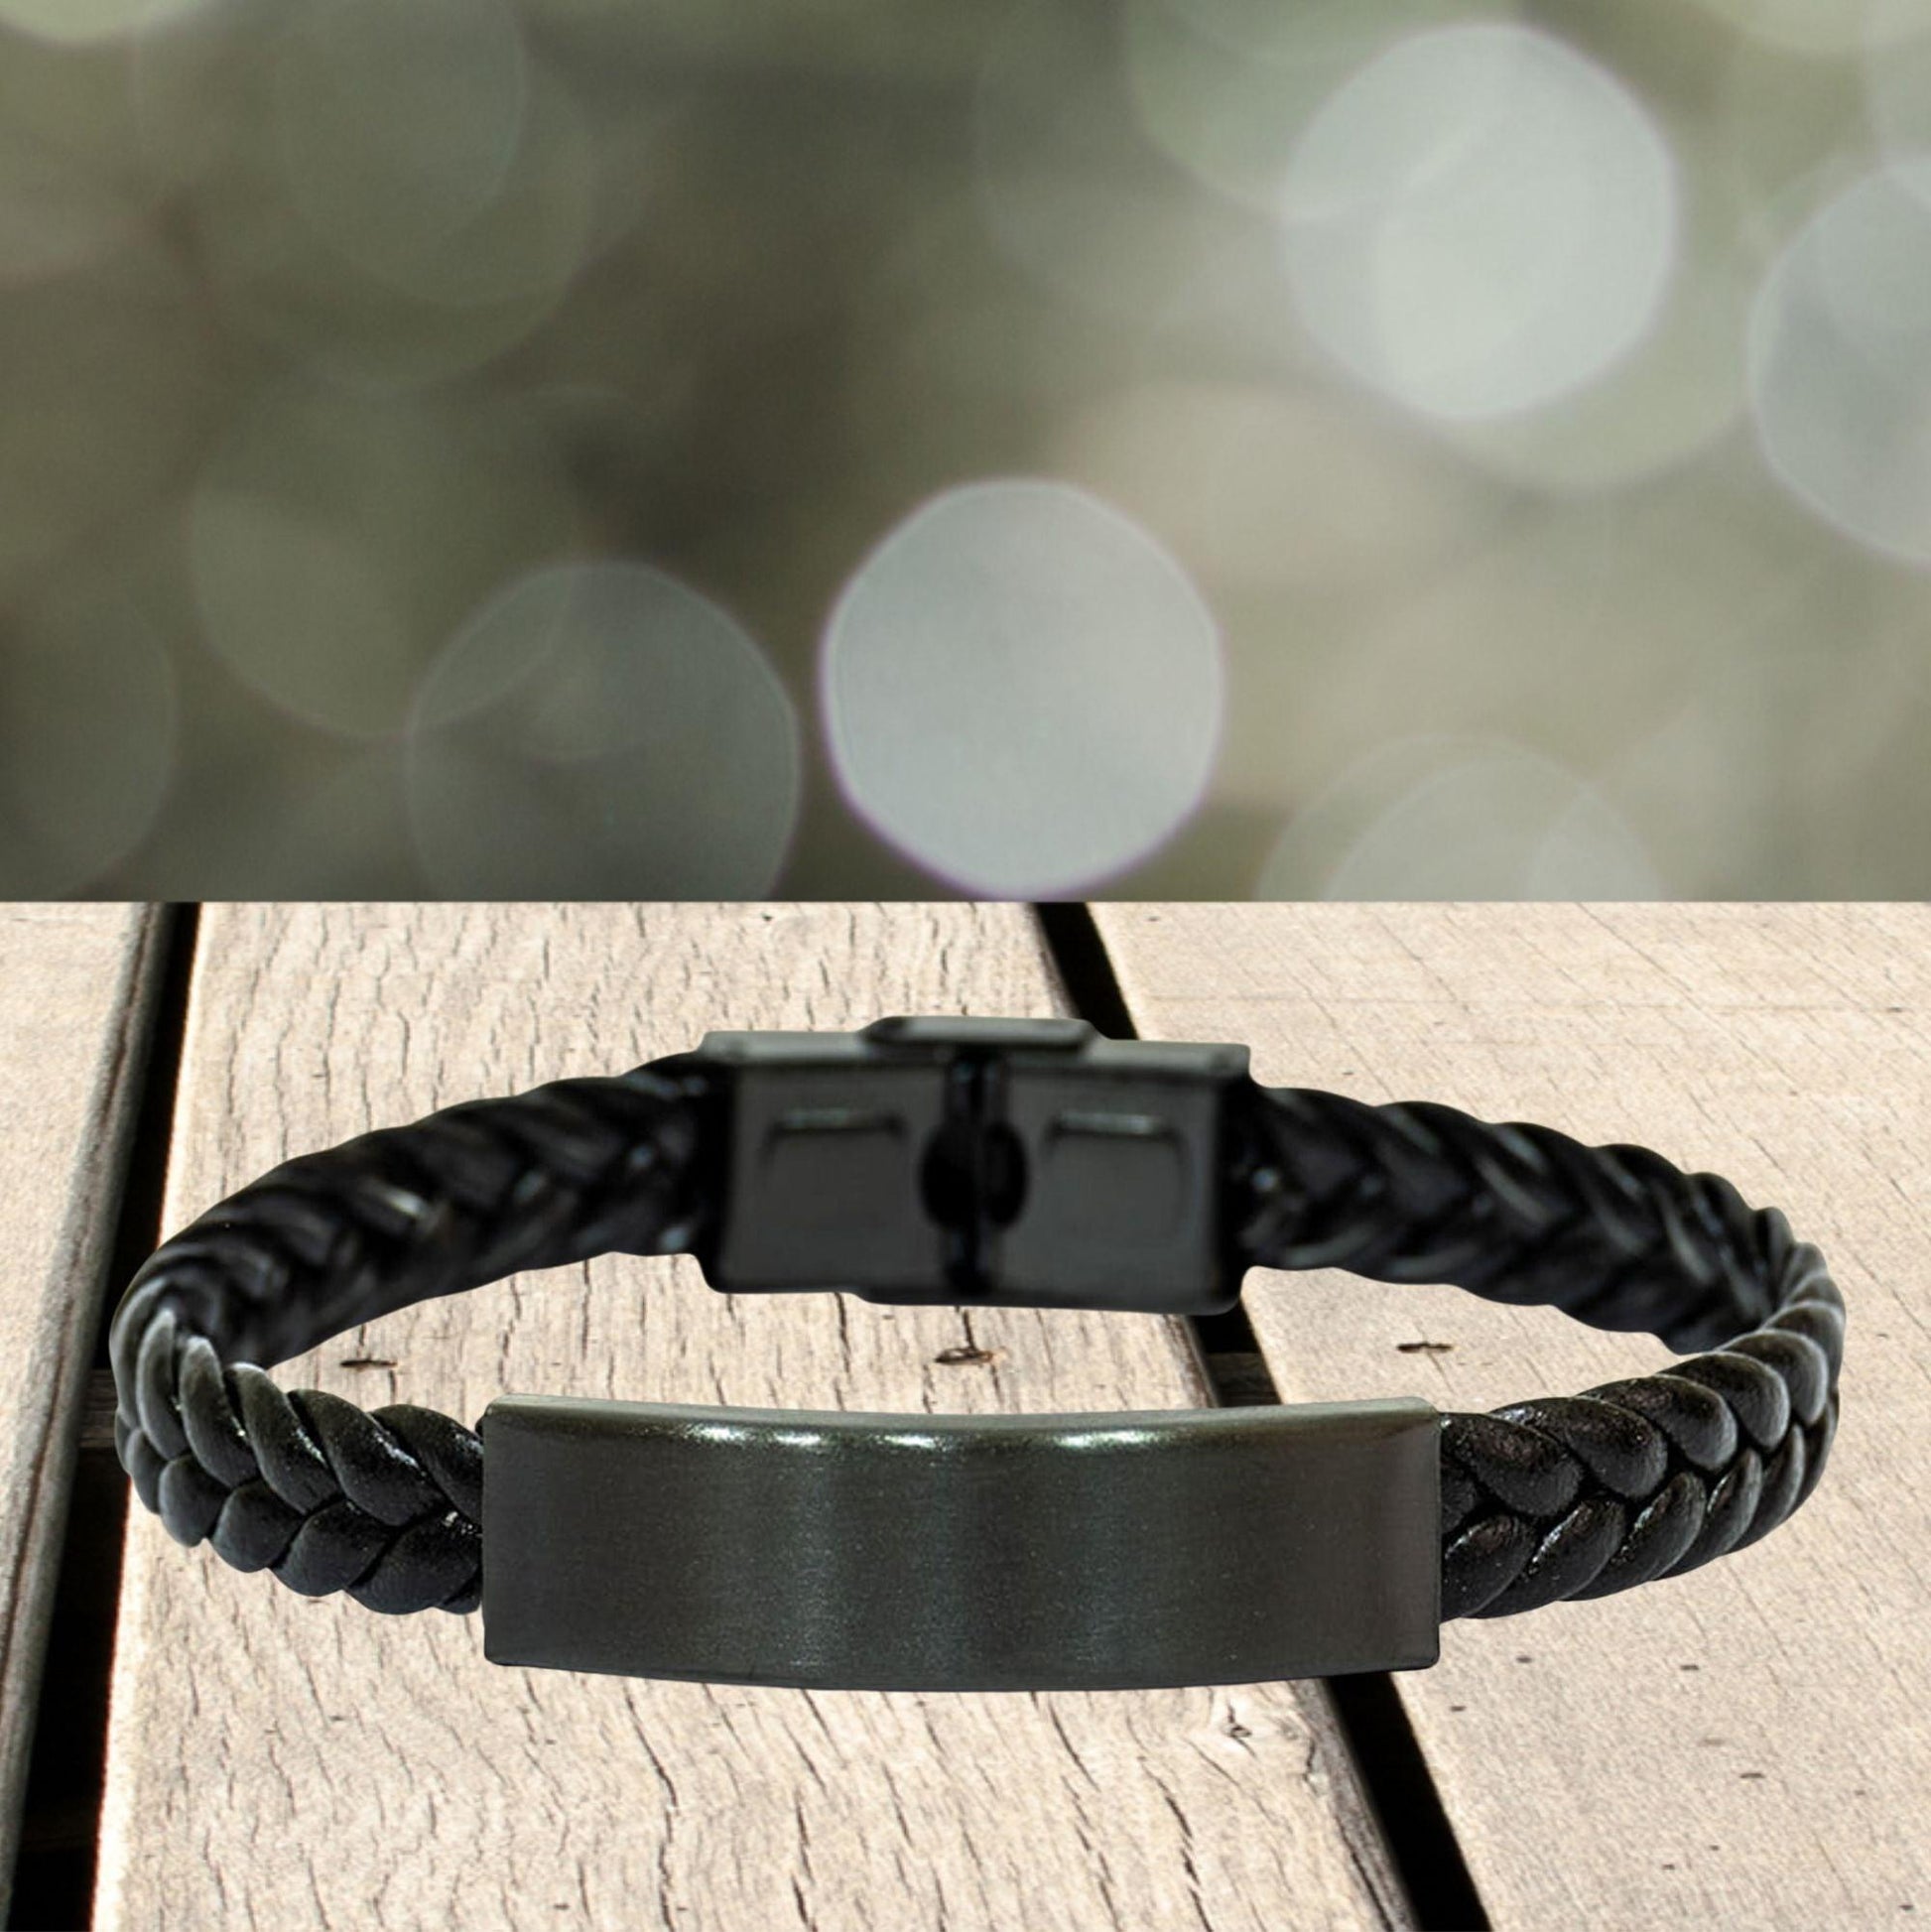 Stepdad Christmas Perfect Gifts, Stepdad Braided Leather Bracelet, Motivational Stepdad Engraved Gifts, Birthday Gifts For Stepdad, To My Stepdad Life is learning to dance in the rain, finding good in each day. I'm always with you - Mallard Moon Gift Shop